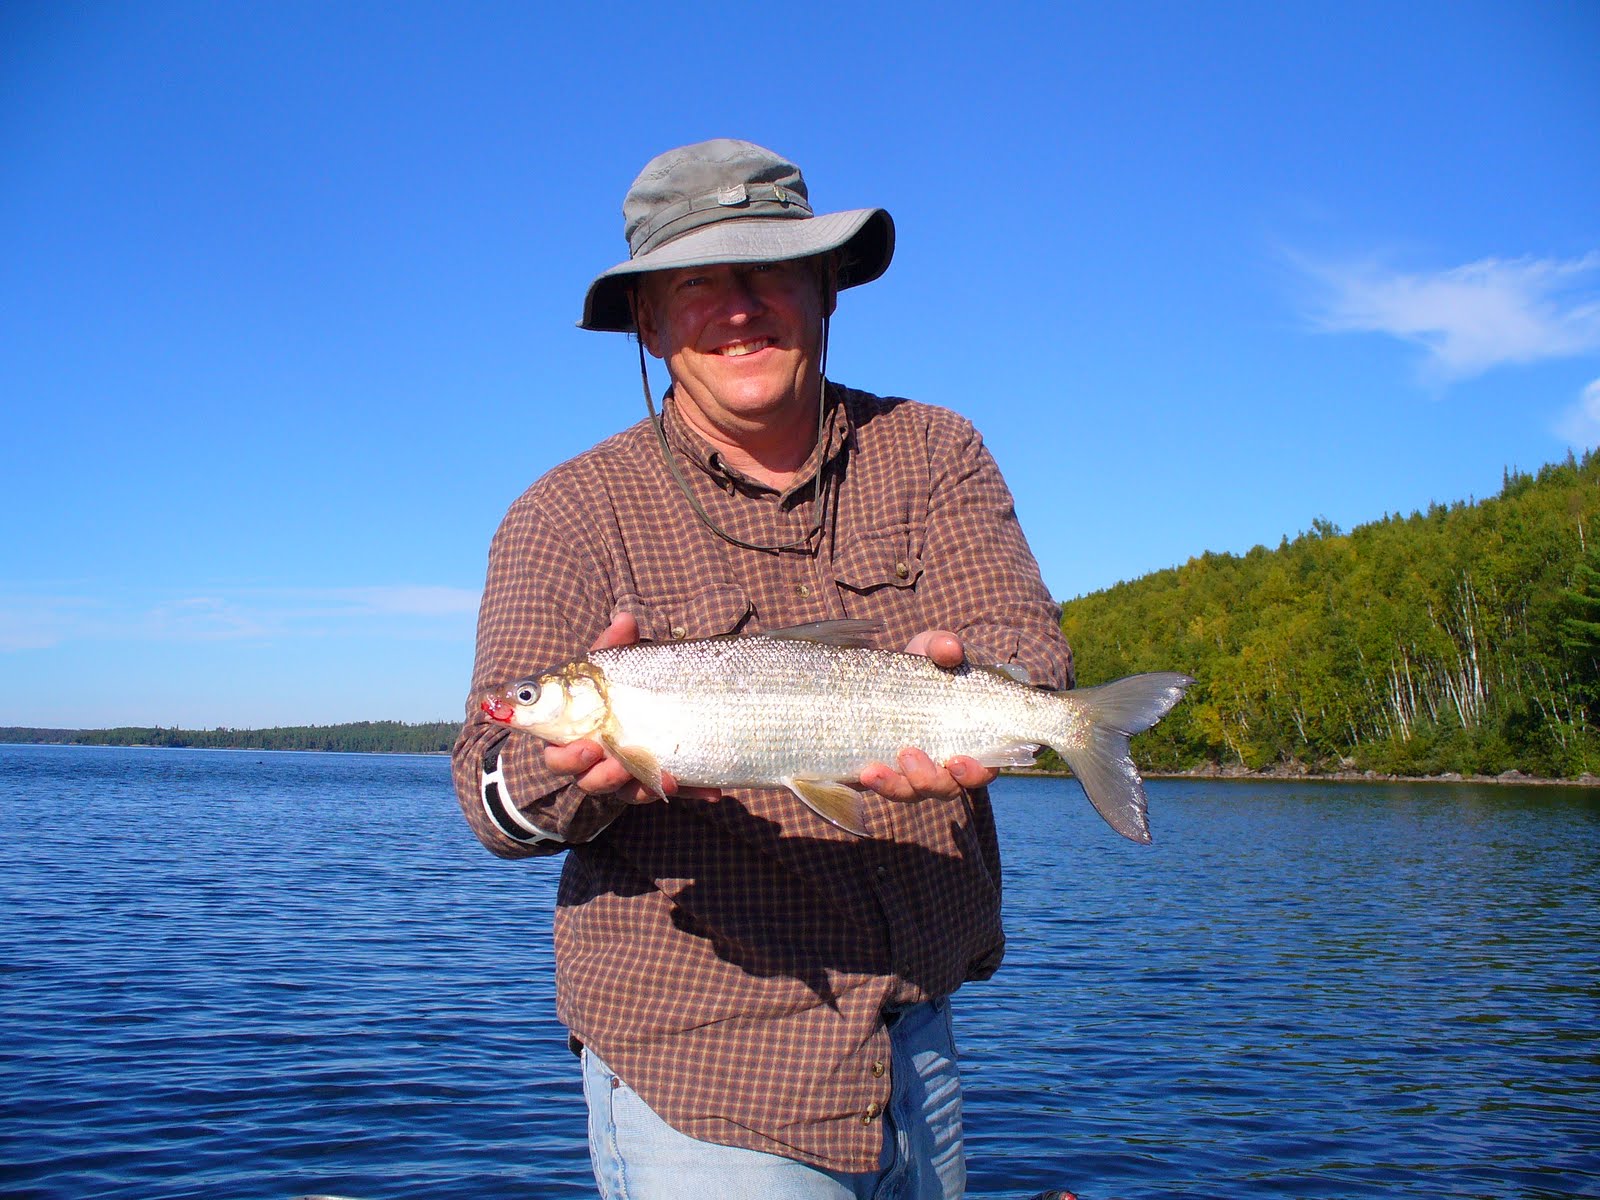 The Wiley Whitefish. - Vermillion Bay Lodge